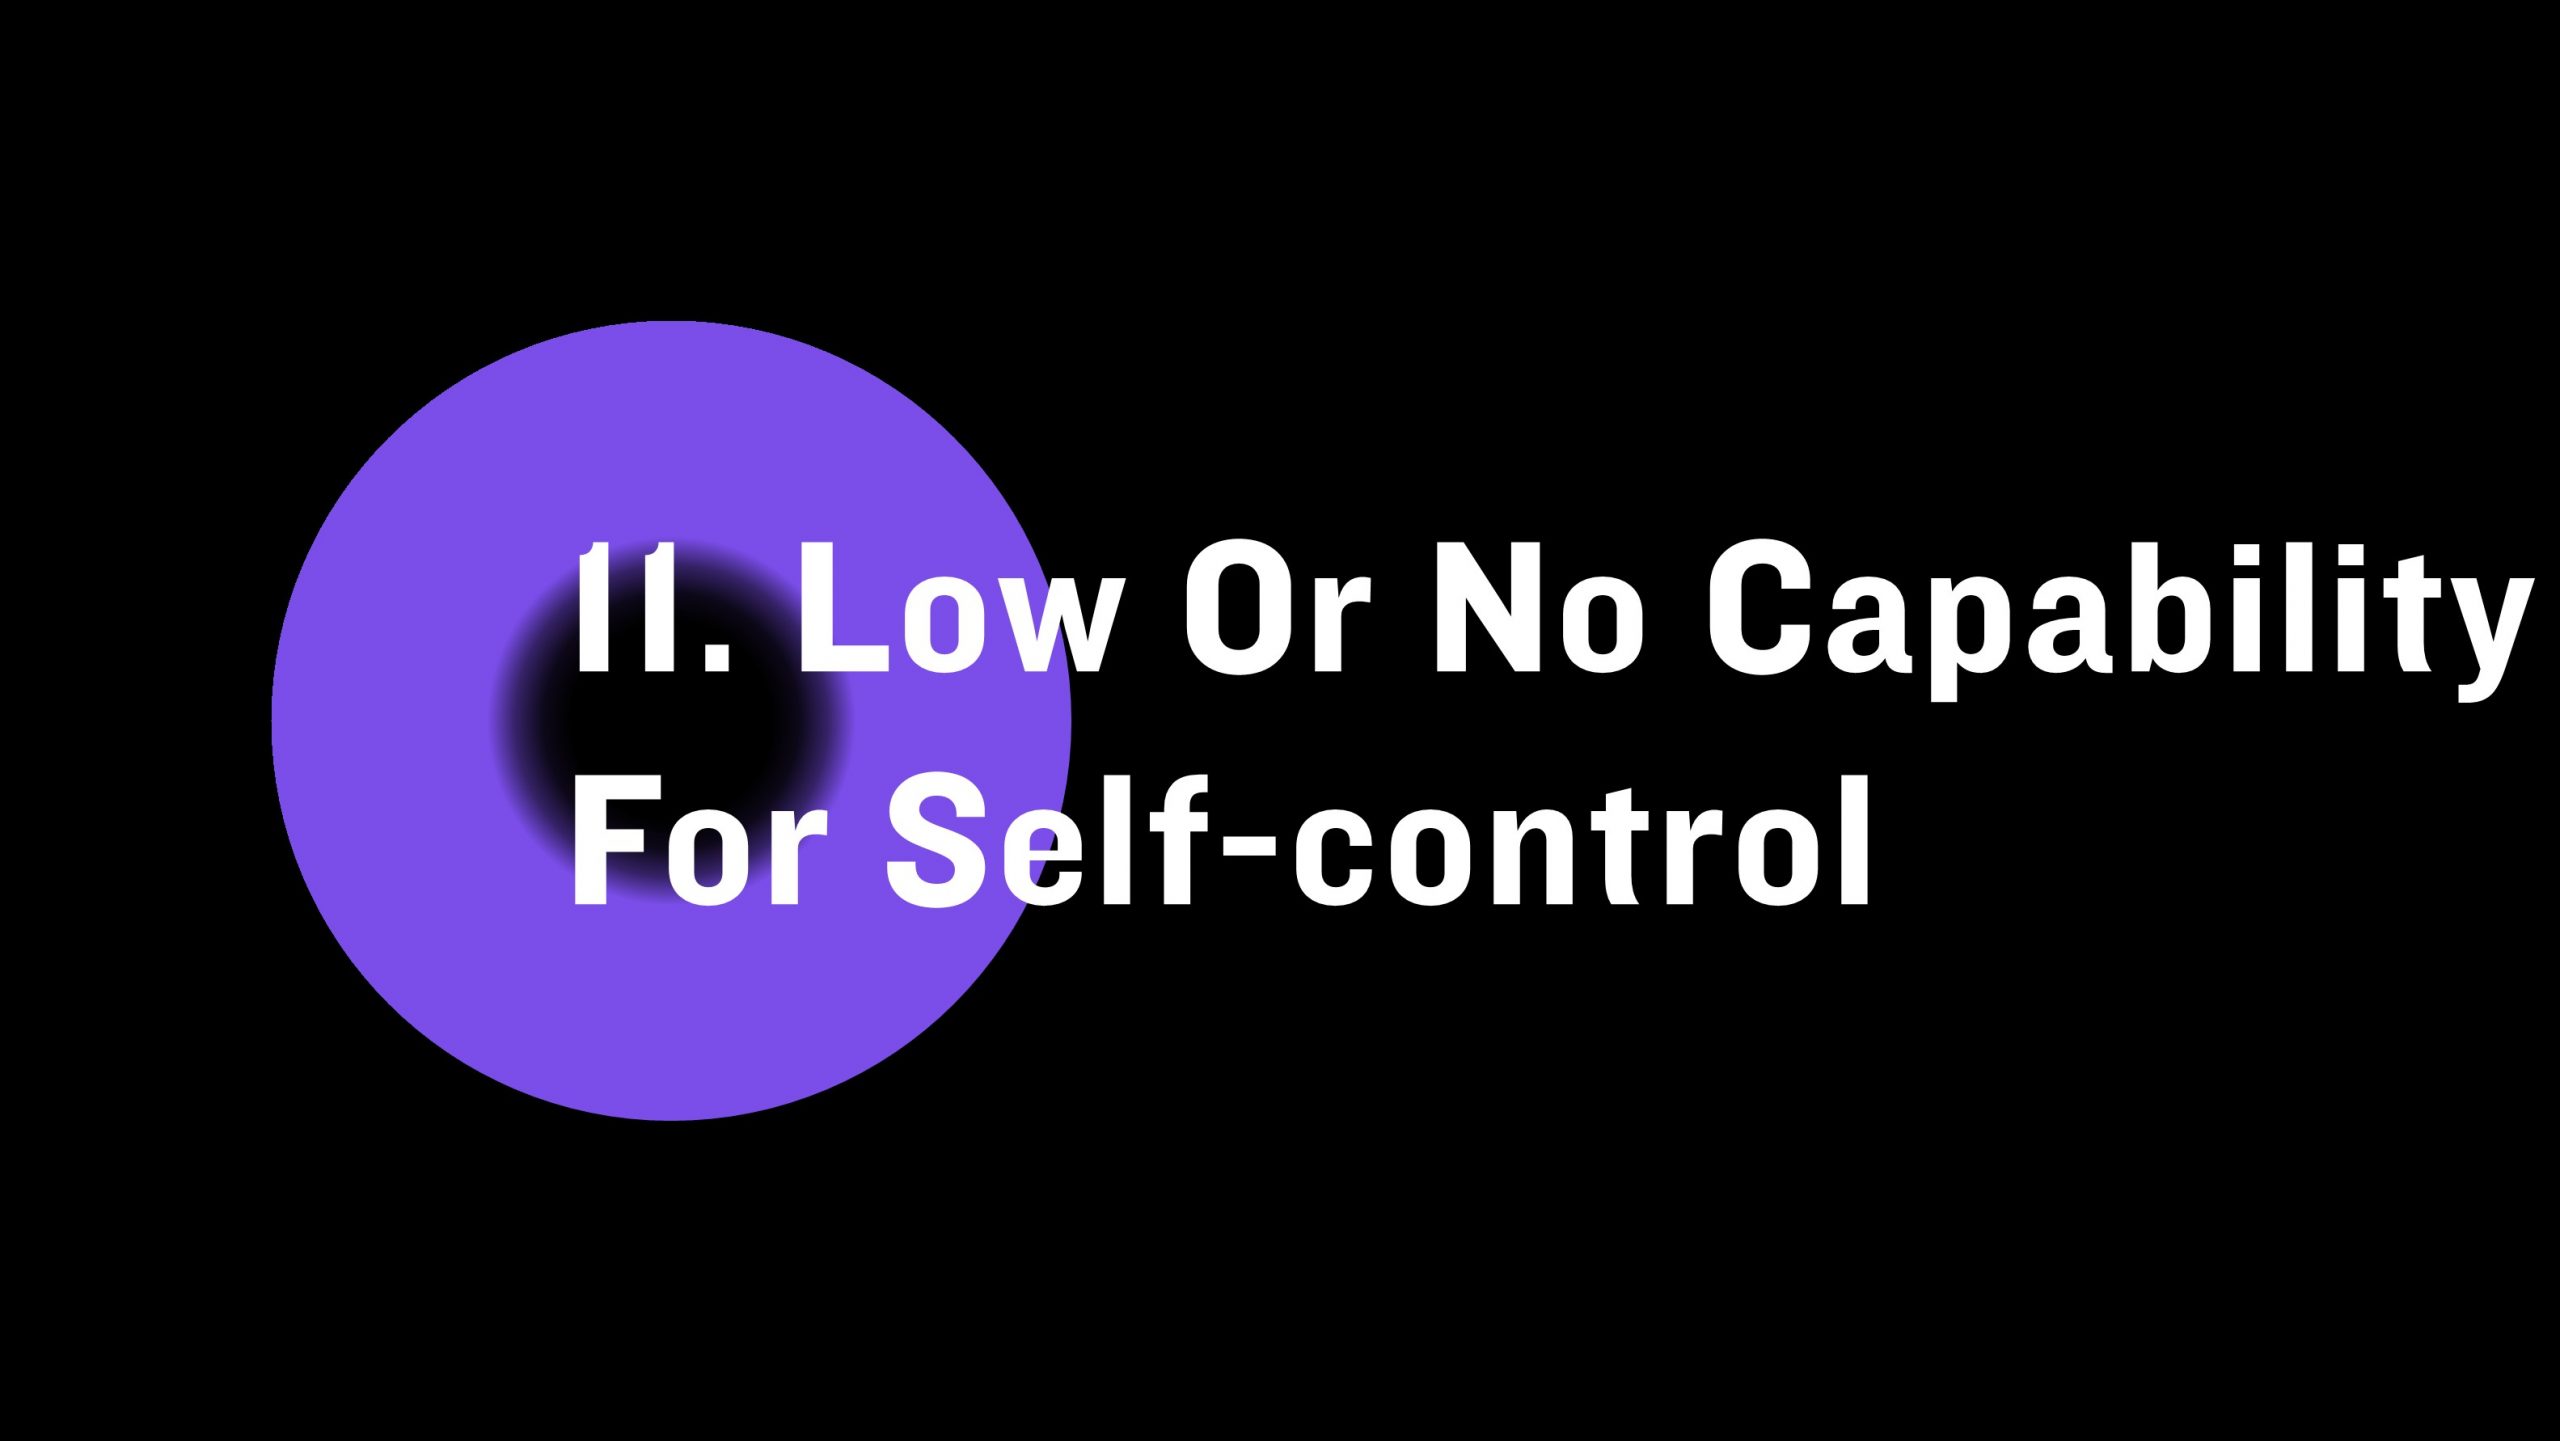 Low or no capability for self-control